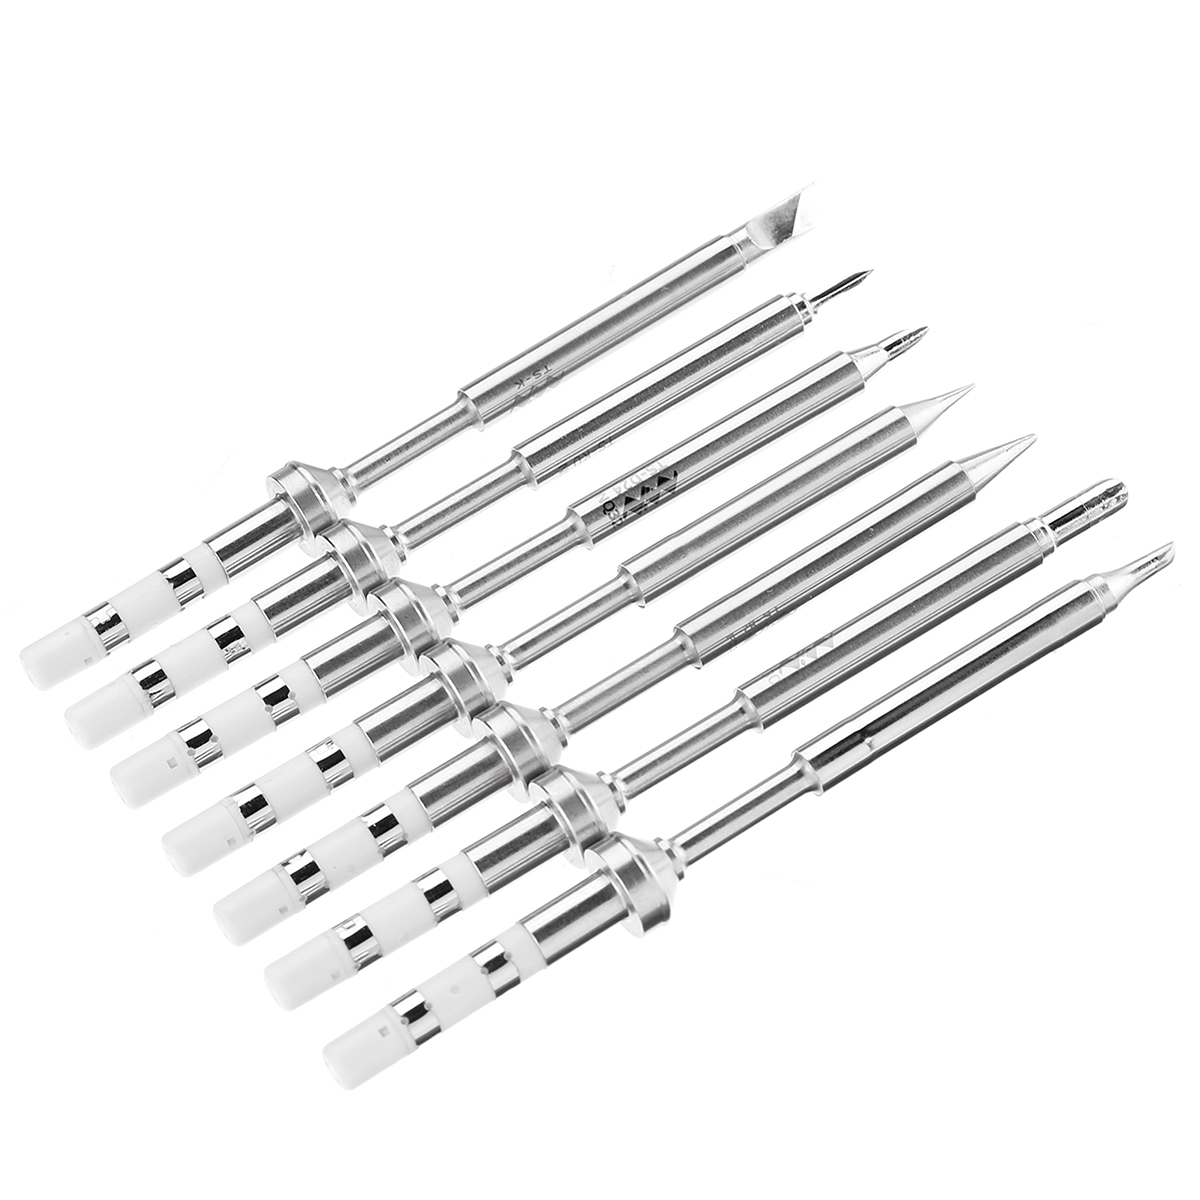 

Drillpro Original Replacement Soldering Iron Tips For TS100 Digital LCD Soldering Iron B2 BC2 I K